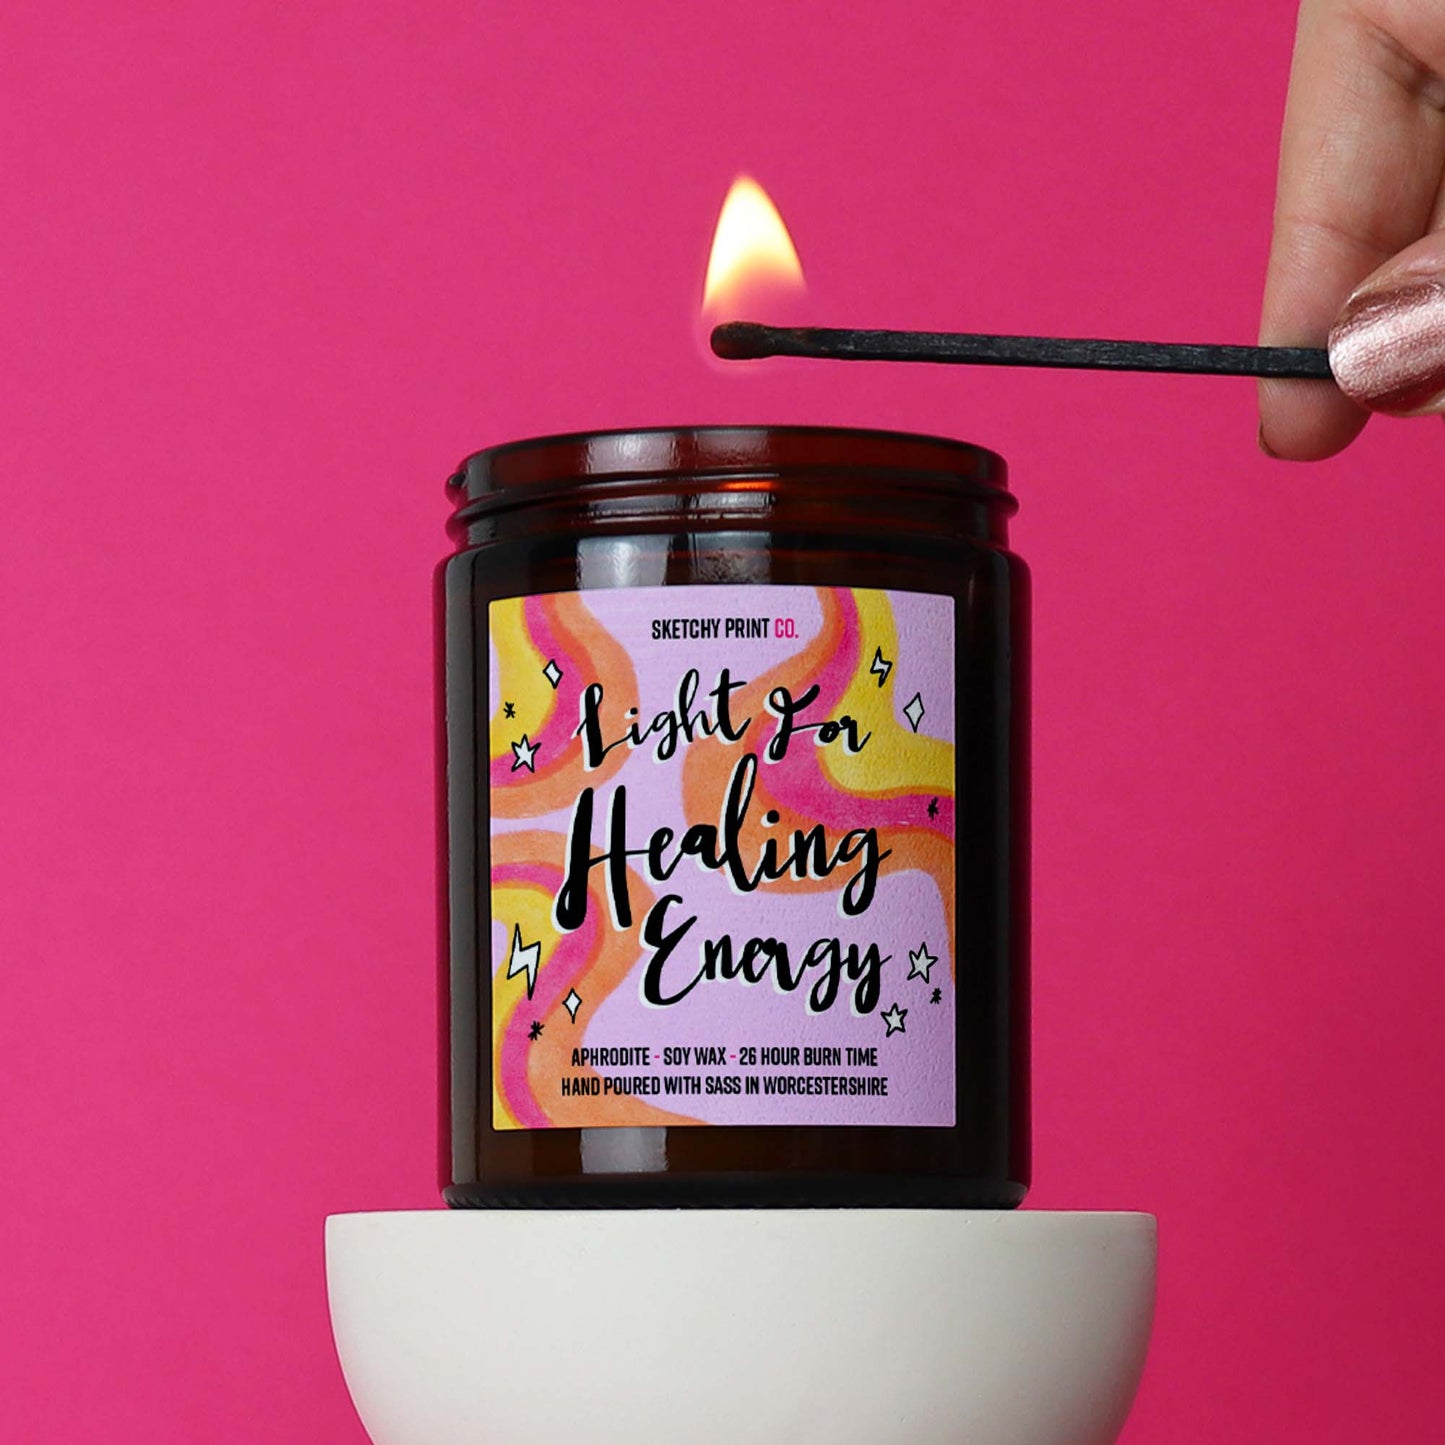 Funny candle gift for her. gift ideas for best friend, girlfriend, wife. Soy wax candle in beautiful amber jar. Colourful design on front saying Light for healing energy. Hand poured with sass in Worcestershire. Positive gift, could be used for a divorce or any healing journey.